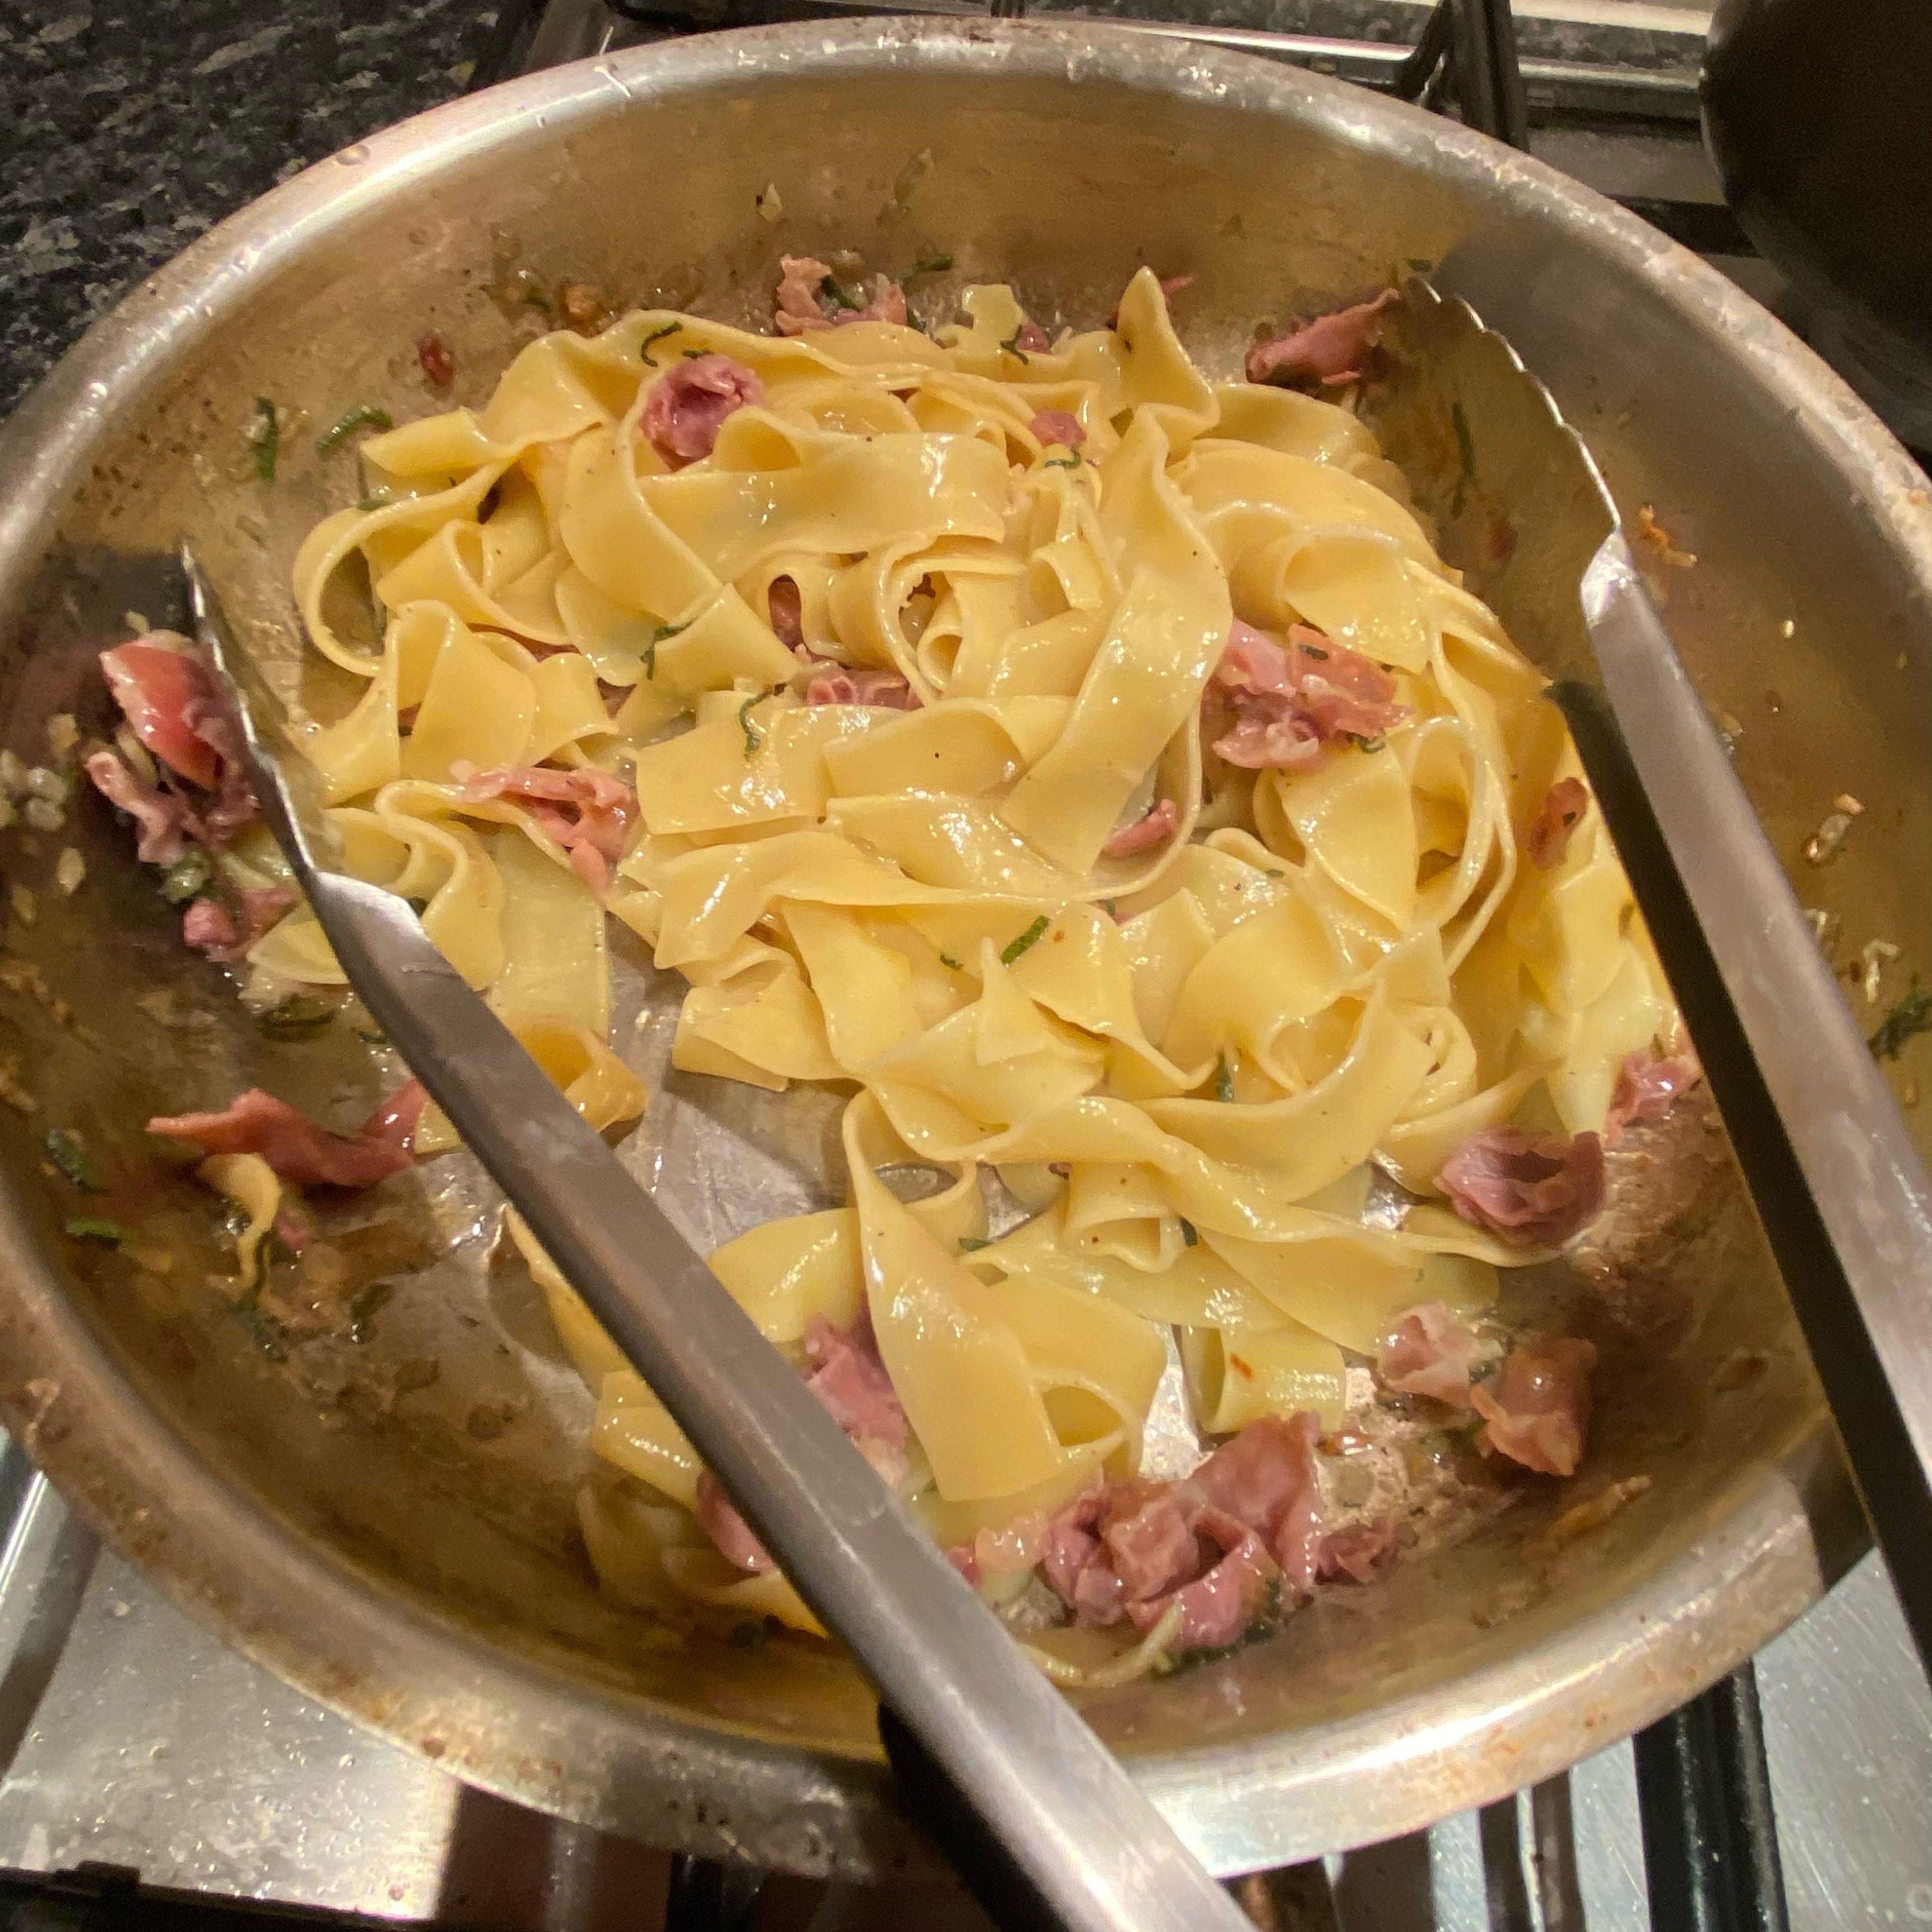 Once tagliatelle is cooked add to the mix and stir.